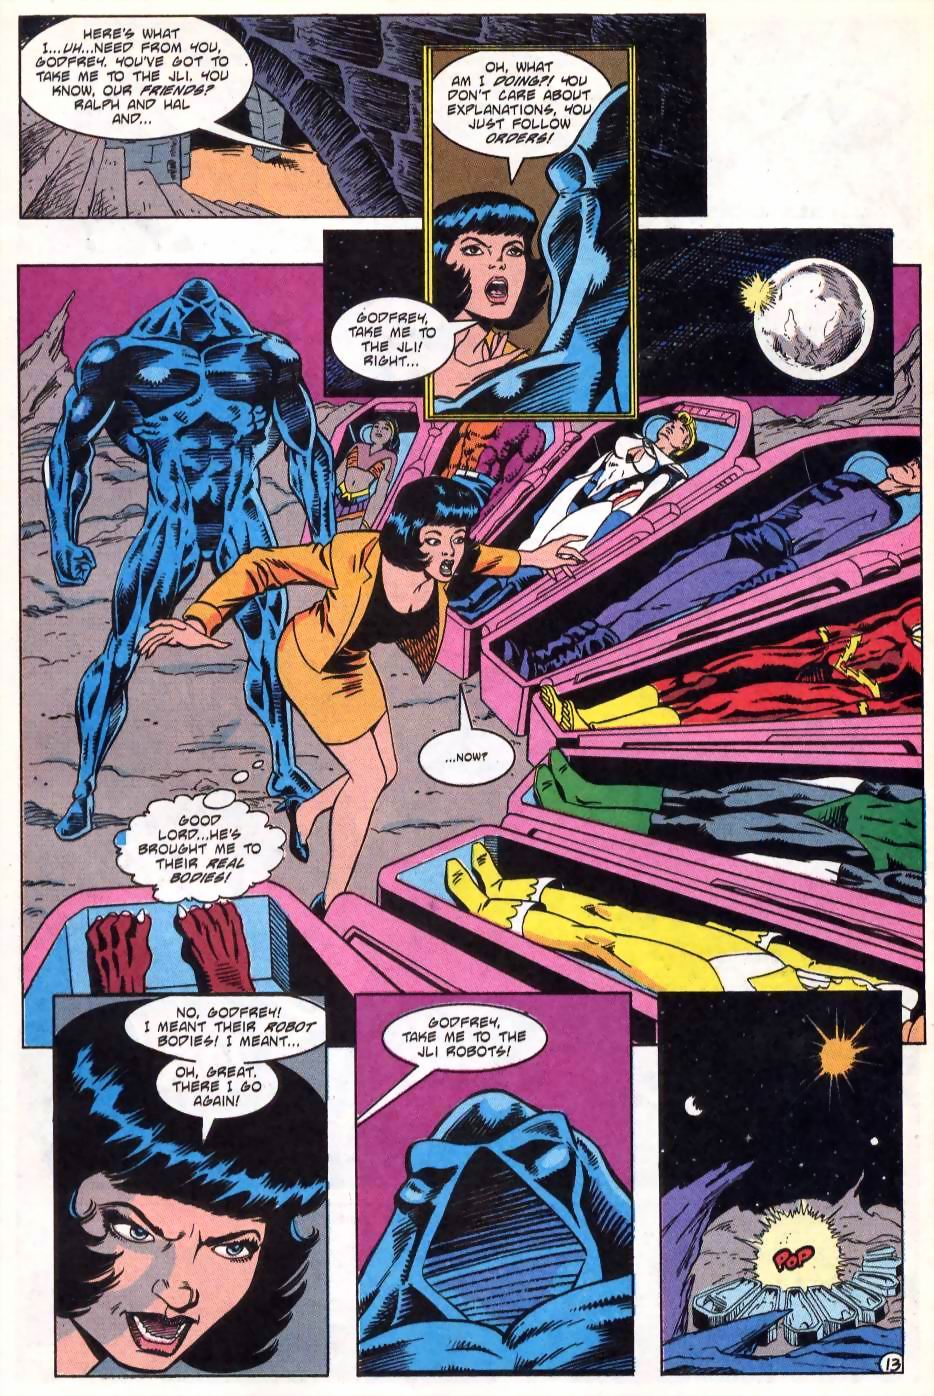 Justice League International (1993) 55 Page 14